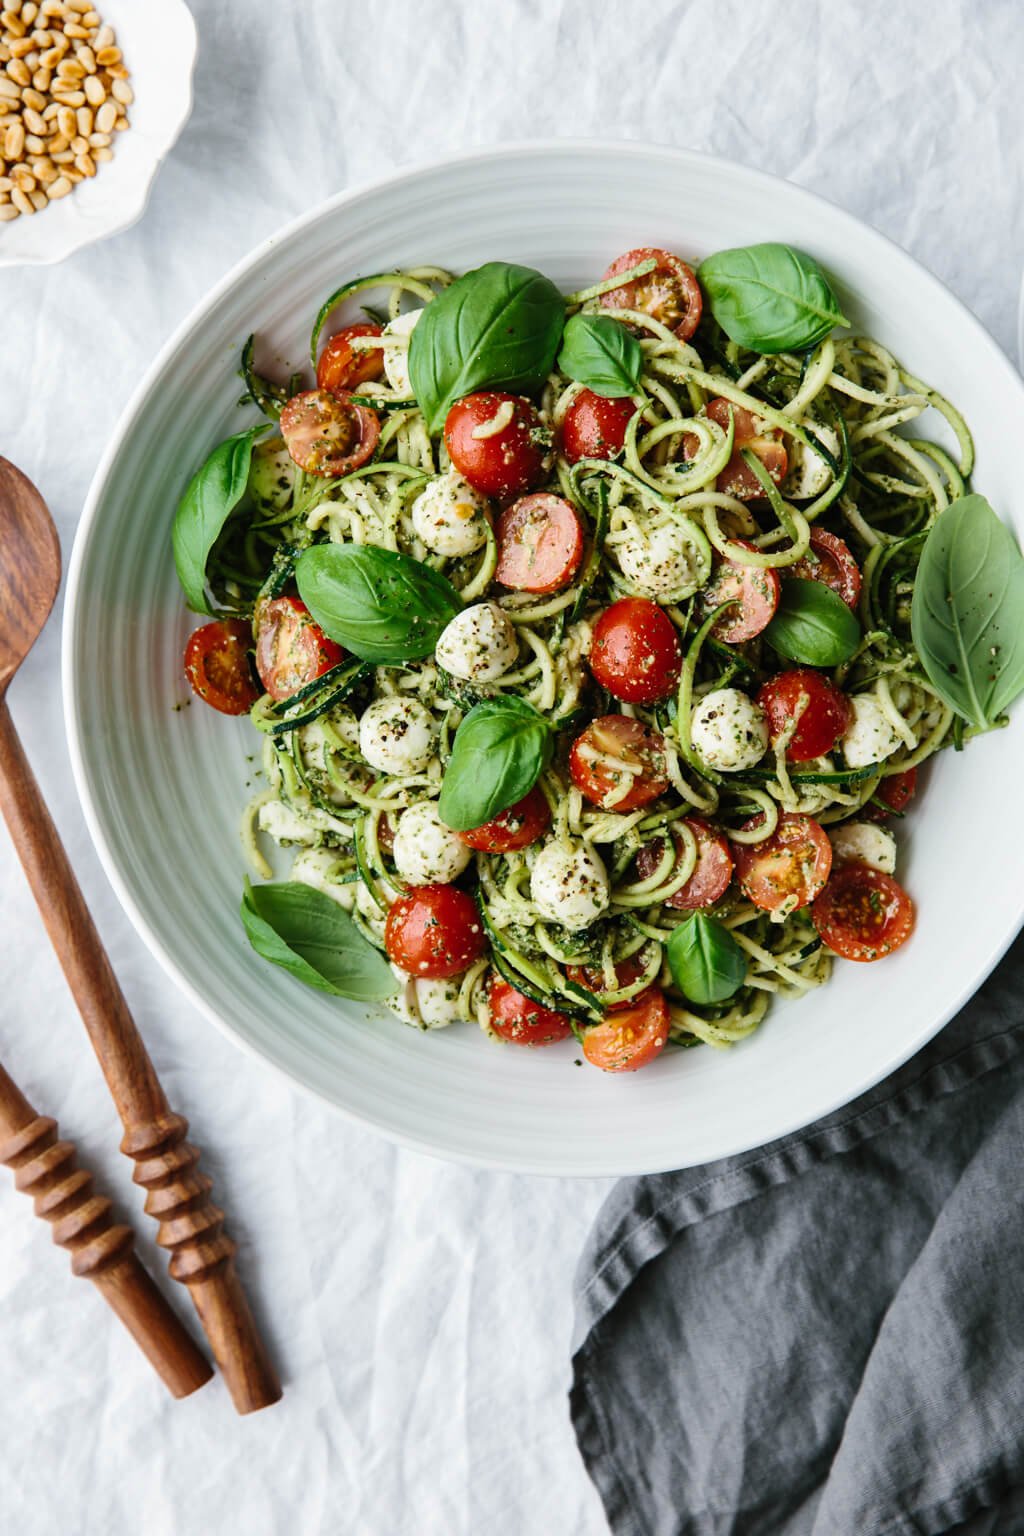 Zucchini noodle caprese is made from my favorite gluten-free pasta alternative, zucchini noodles - and inspired by one of my all time favorite salads, caprese.